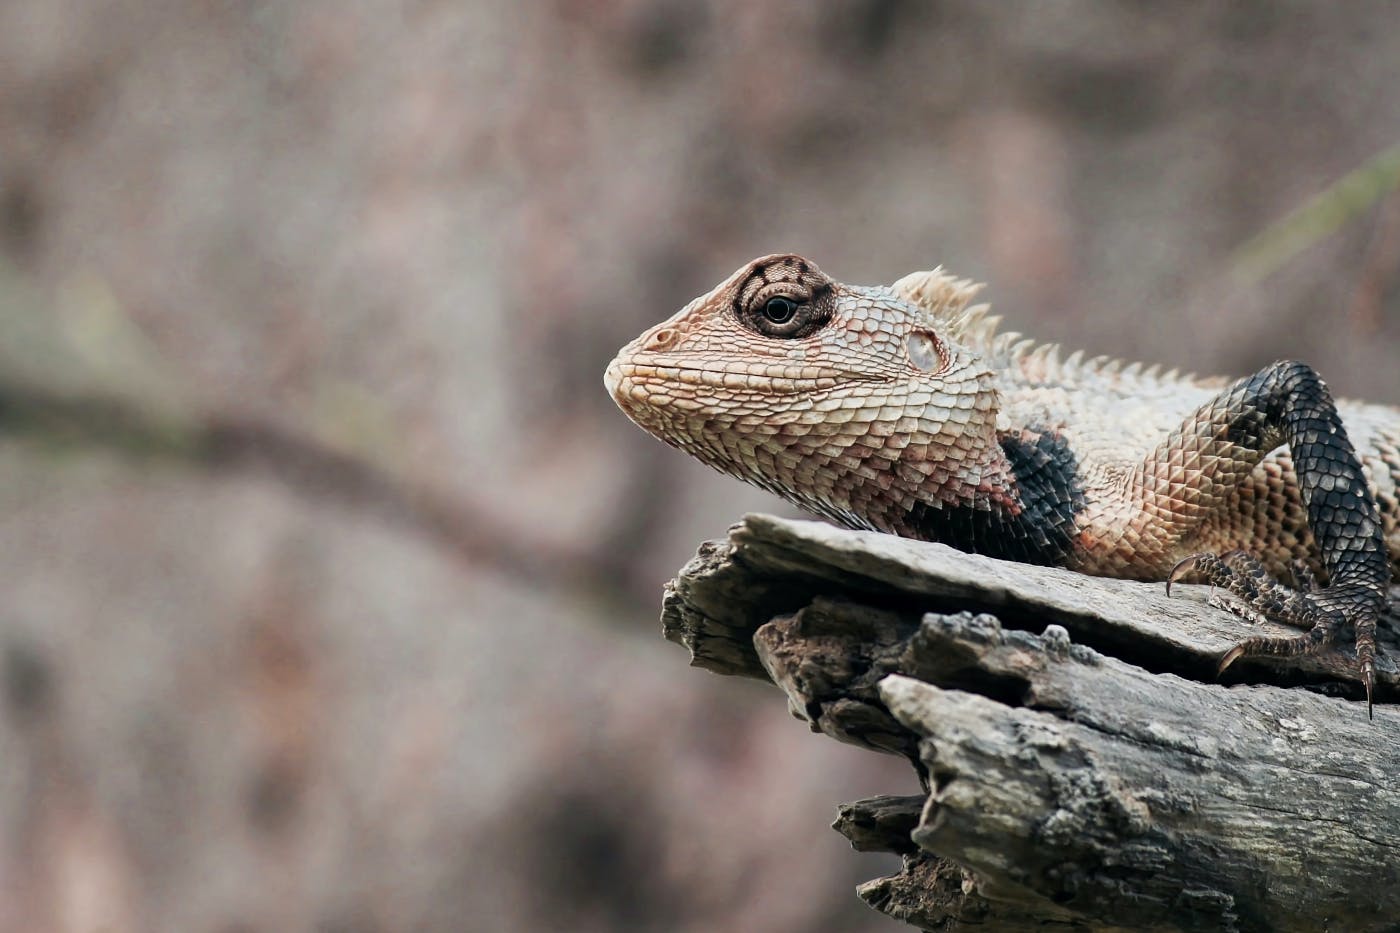 A brown and black lizard on a branch